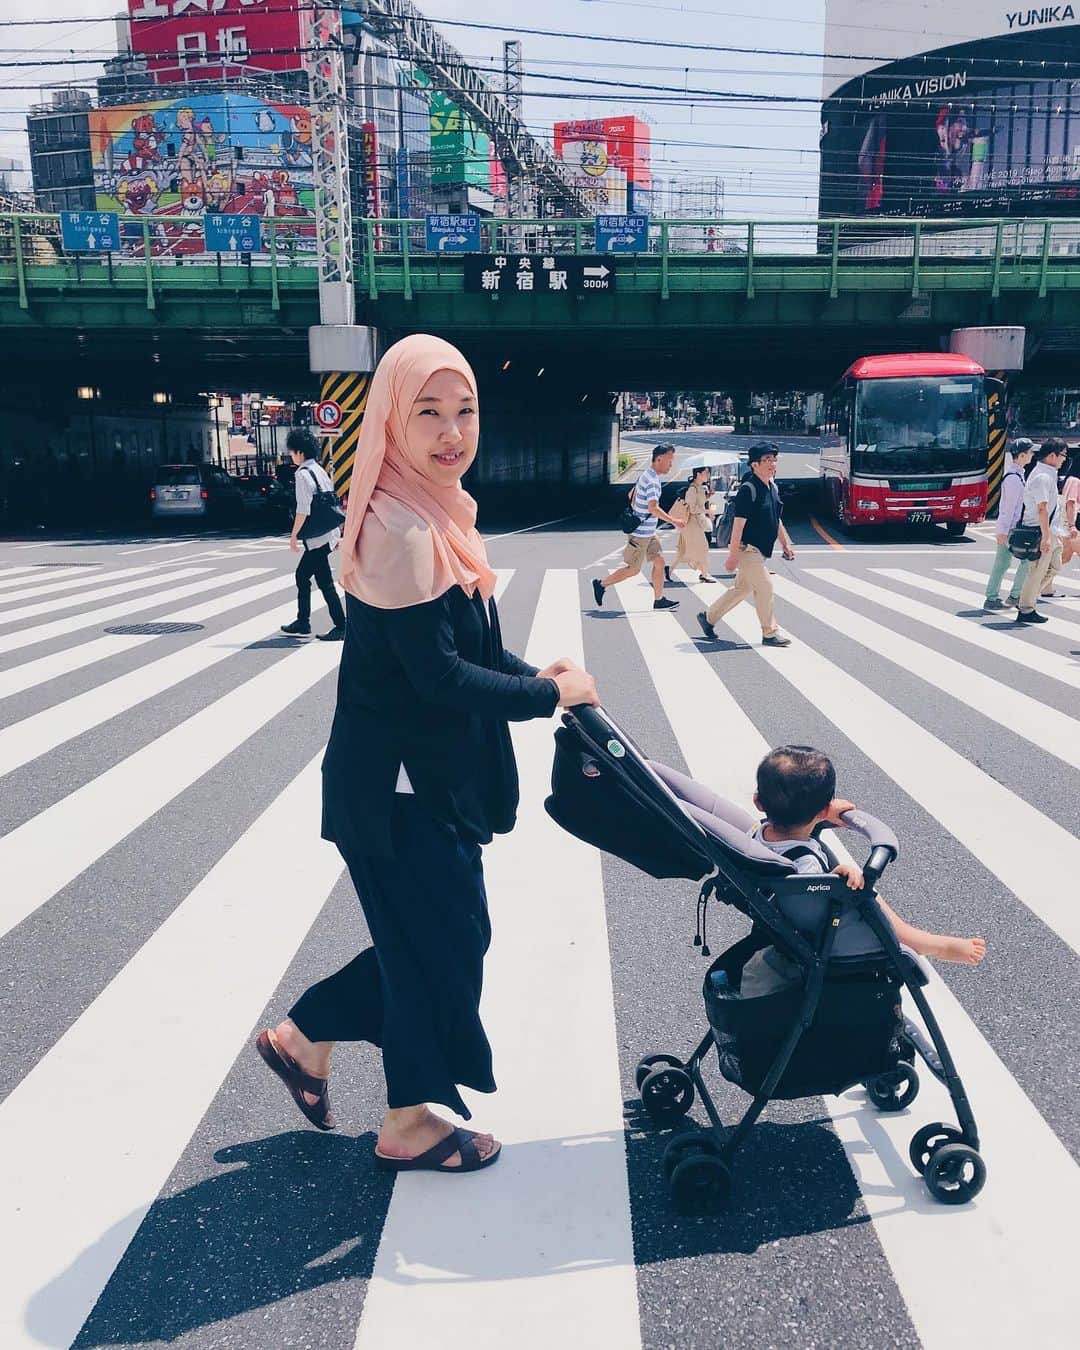 Risa Mizunoのインスタグラム：「Selamat Hari Raya Aidil Adha❤️ I just want to share with you life in Japan as Muslimah. I heard that some people might exaggerate to say Muslim in Japan has full of difficulties and always been isolated from society but I believe not all Muslim in Japan is like that. For example, even I need to face the fact that my families are not Muslim but I always don’t lose my hope on them. All I can do is doa and treat them with the way Islam teaches me which actually make my family relationship better than before. Alhamdulillah. Of course, there are hard times requires a lot of patience, efforts and time but for me, Japan society treat me fair. Even it’s hard I believe the efforts that we make will be paid off either here or in Akhirat in sha Allah. So please include us in your prayer for an easier and meaningful journey 🙏✨ #japanesemuslim #japanesemuslimah #muslim #muslimah #japan #tokyo #shinjuku #japanese #muslimahtokyo #hijab #travel #japantrip #tokyotrip #traveljapan #japanlife #🇲🇾 #🇯🇵 #teamraya」